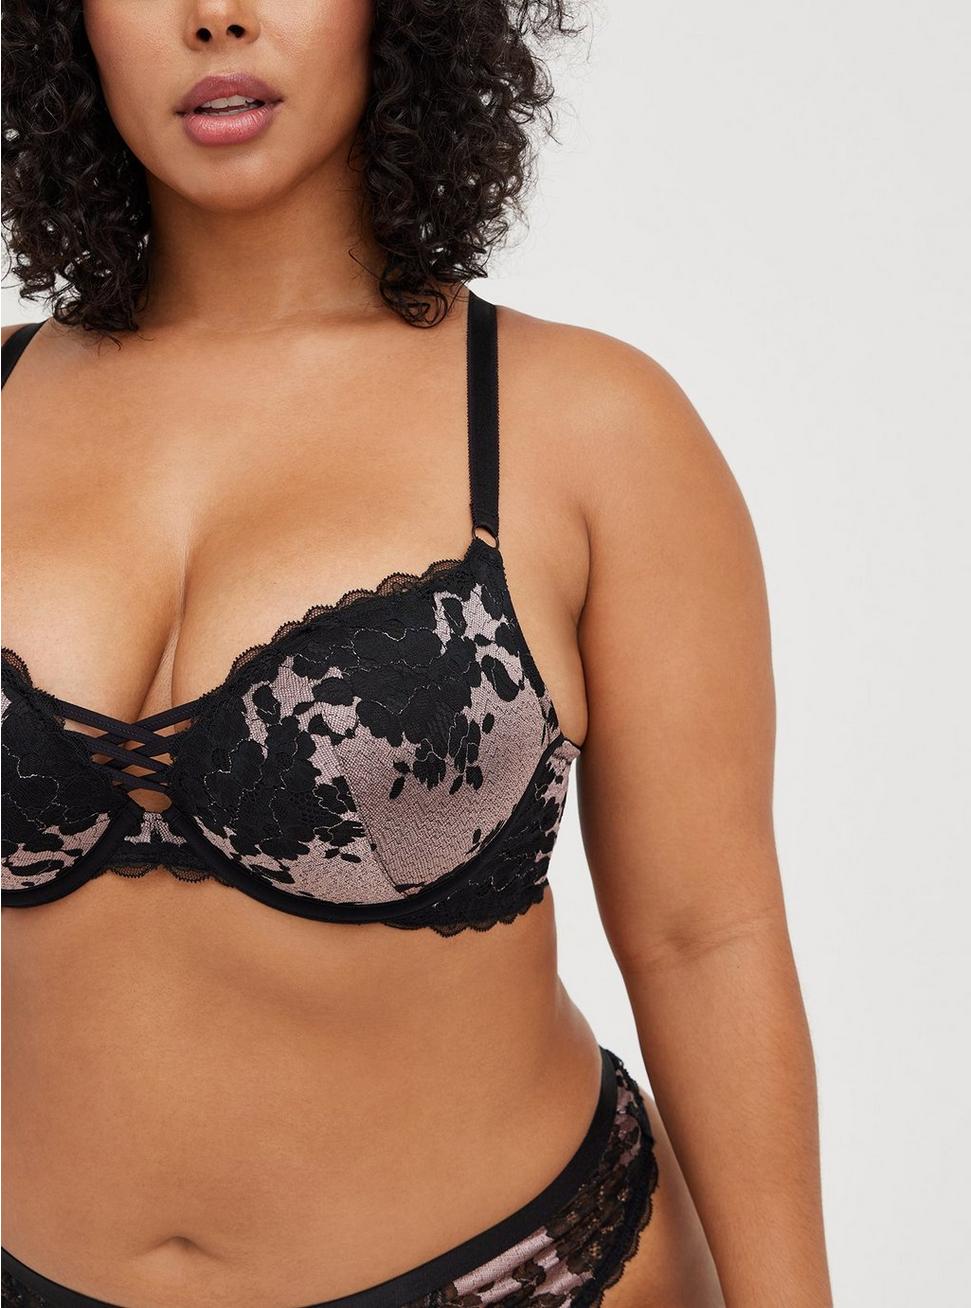 TORRID HAS THE BEST PUSH UP BRAS EVER! Just wanna give a shout out